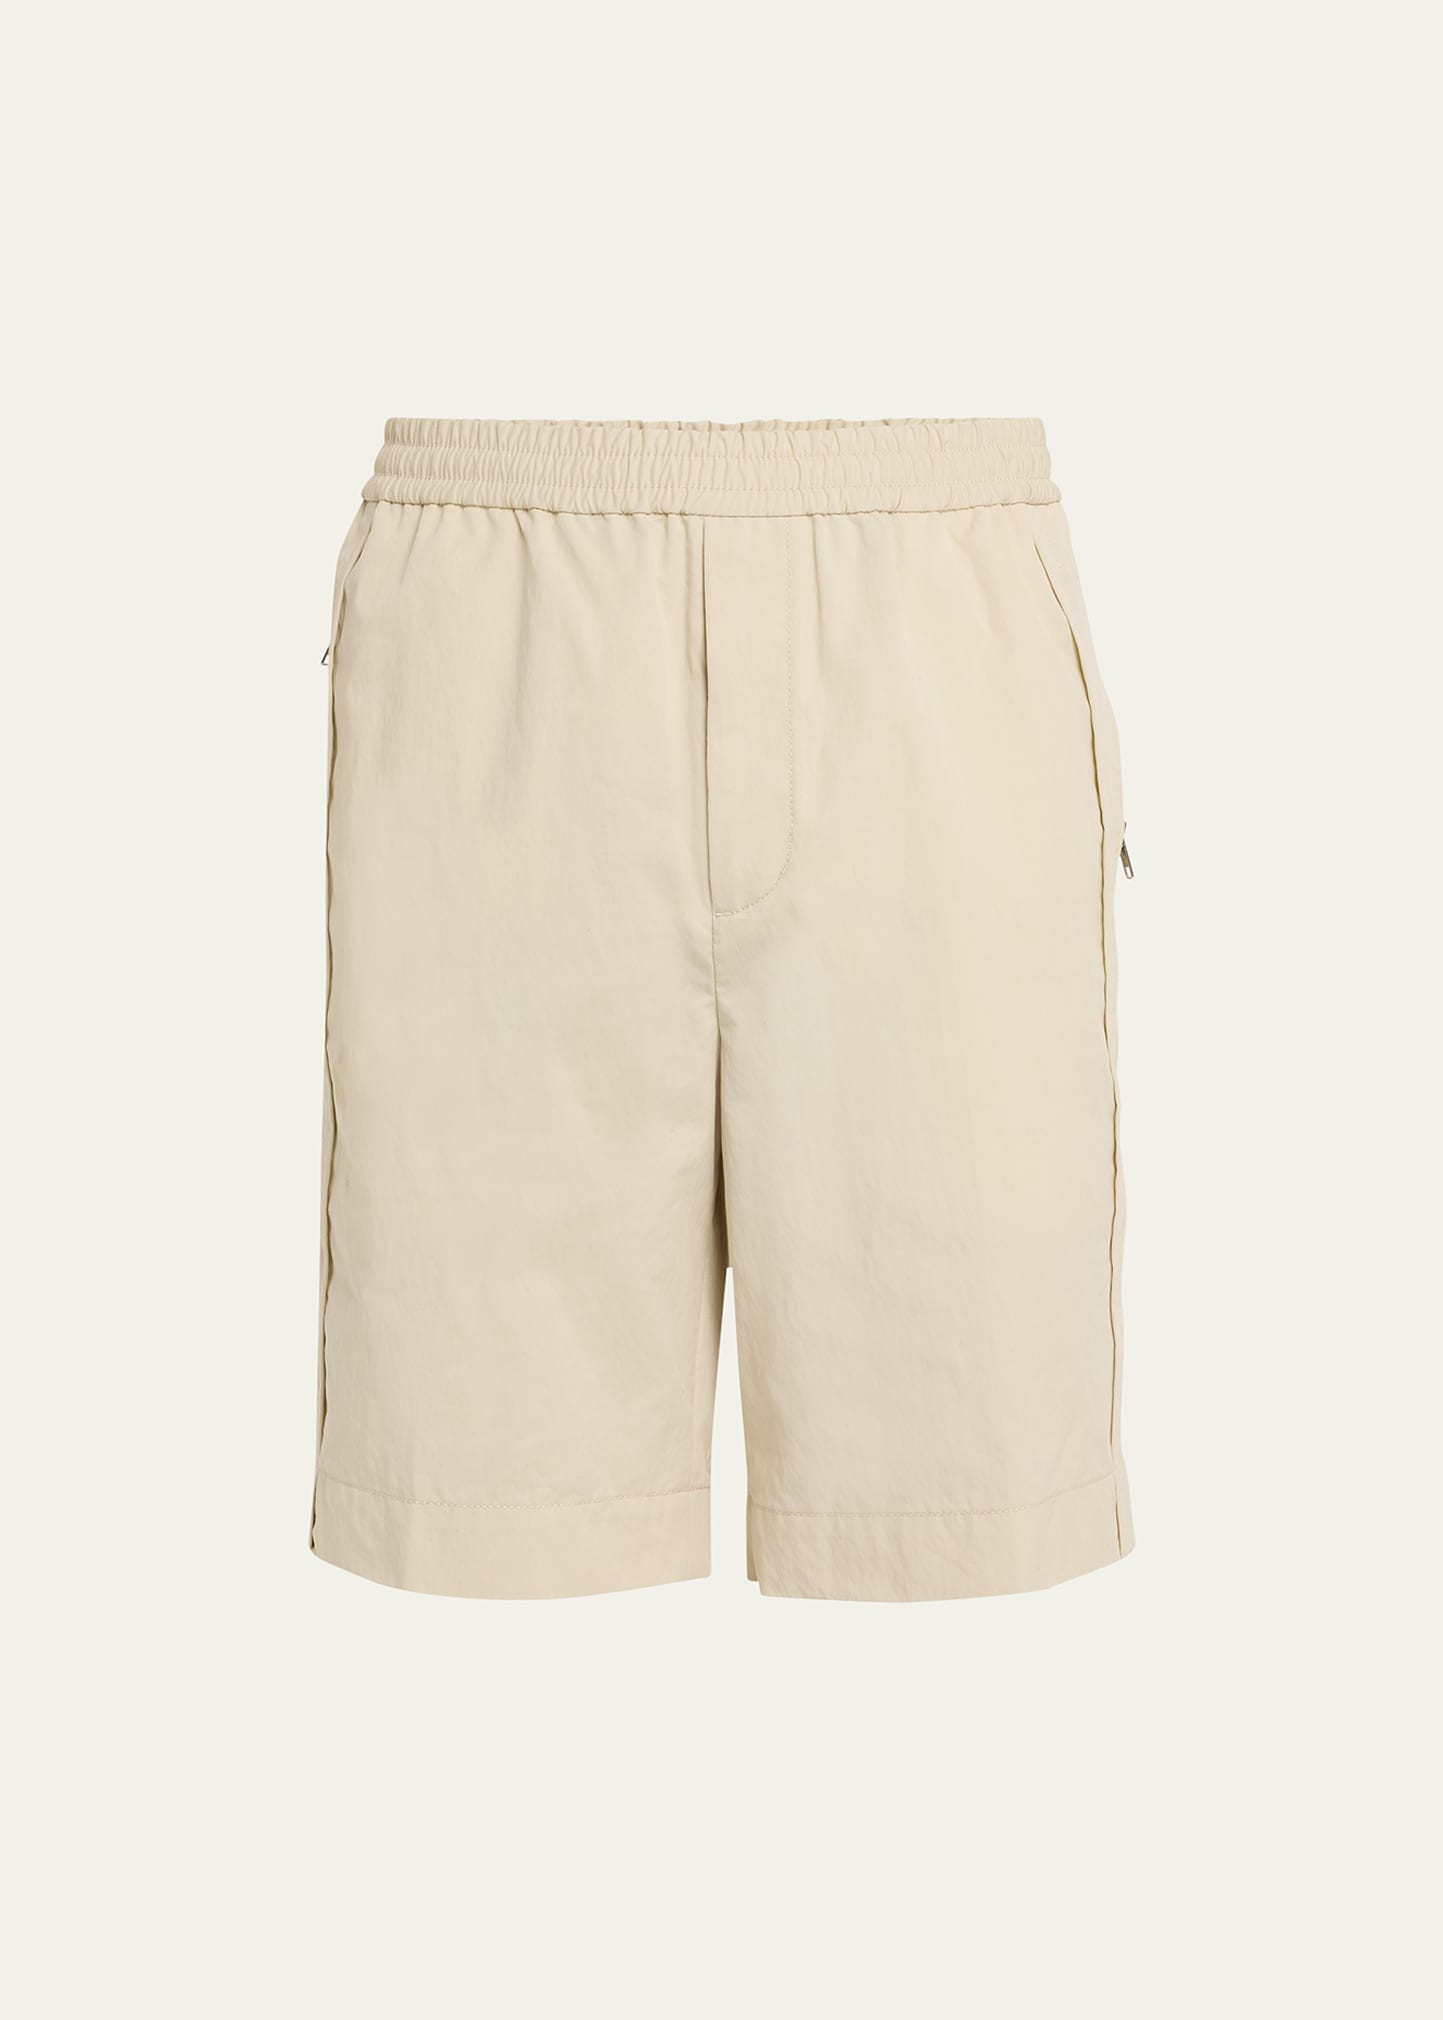 3.1 Phillip Lim / フィリップ リム Men's Solid Twill Shorts In Sand